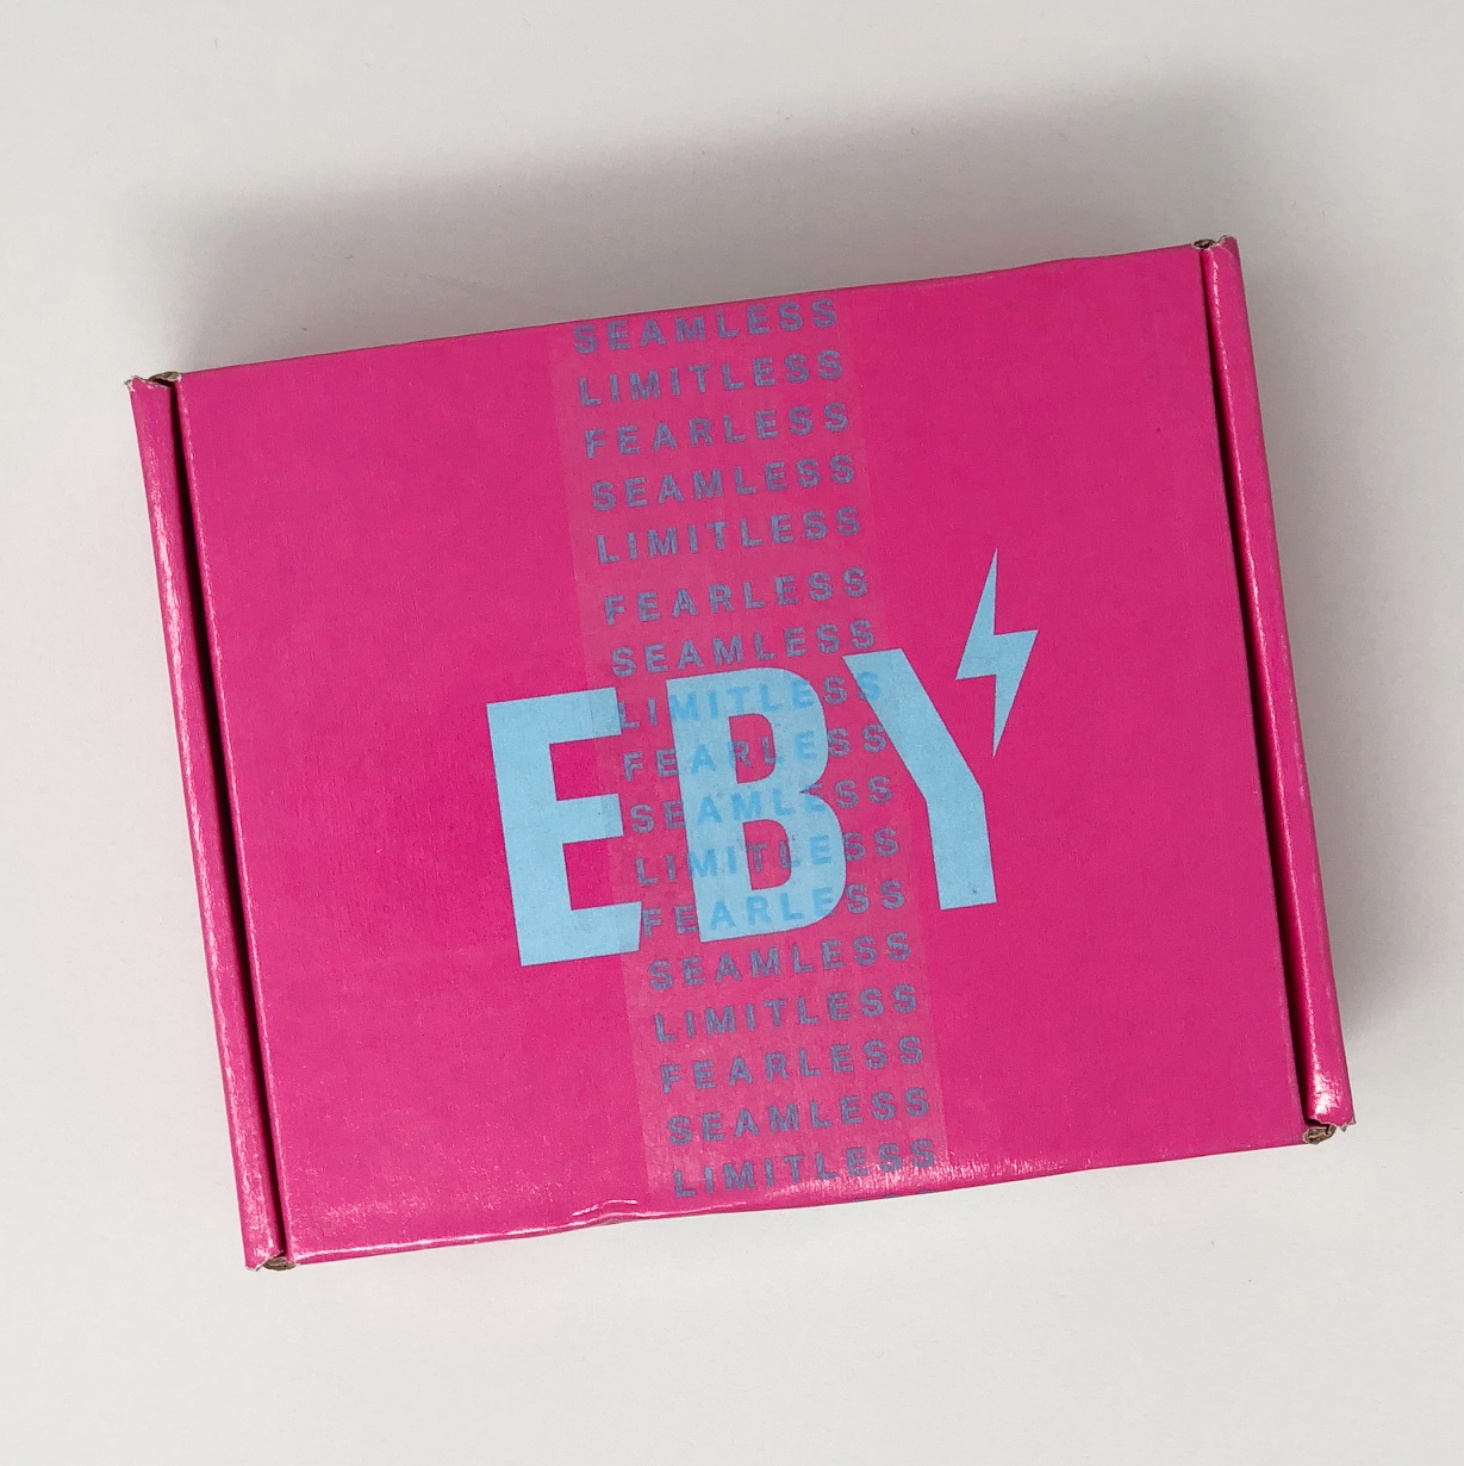 EBY Intimates Subscription Box Review – February 2018